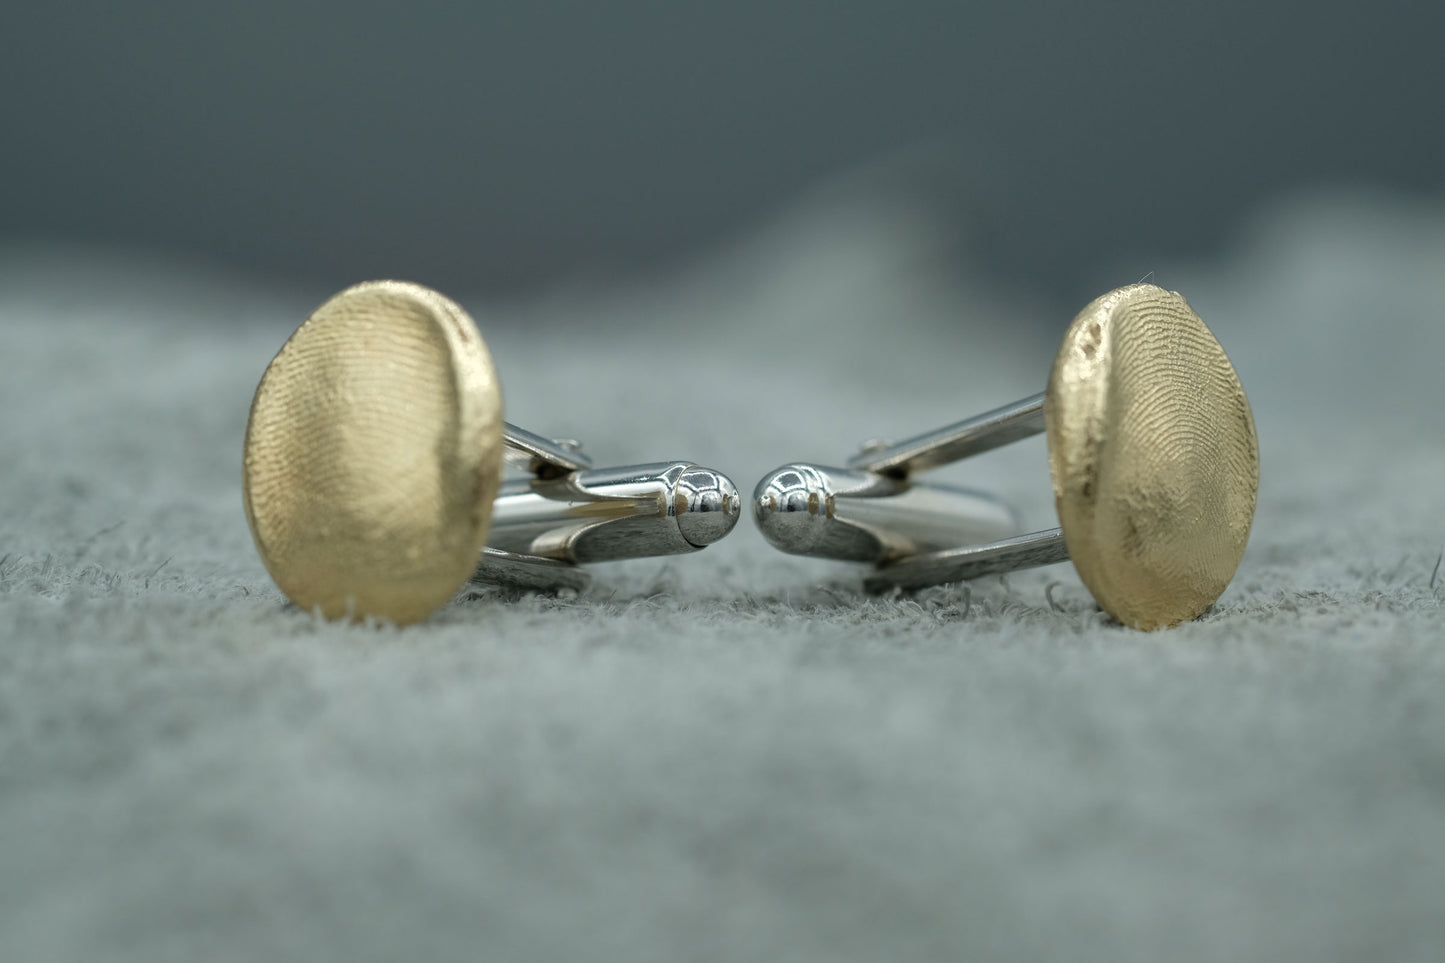 Children's Fingerprints Cufflinks in solid 10k Gold and 925 Sterling Silver by Matanai Jewelry